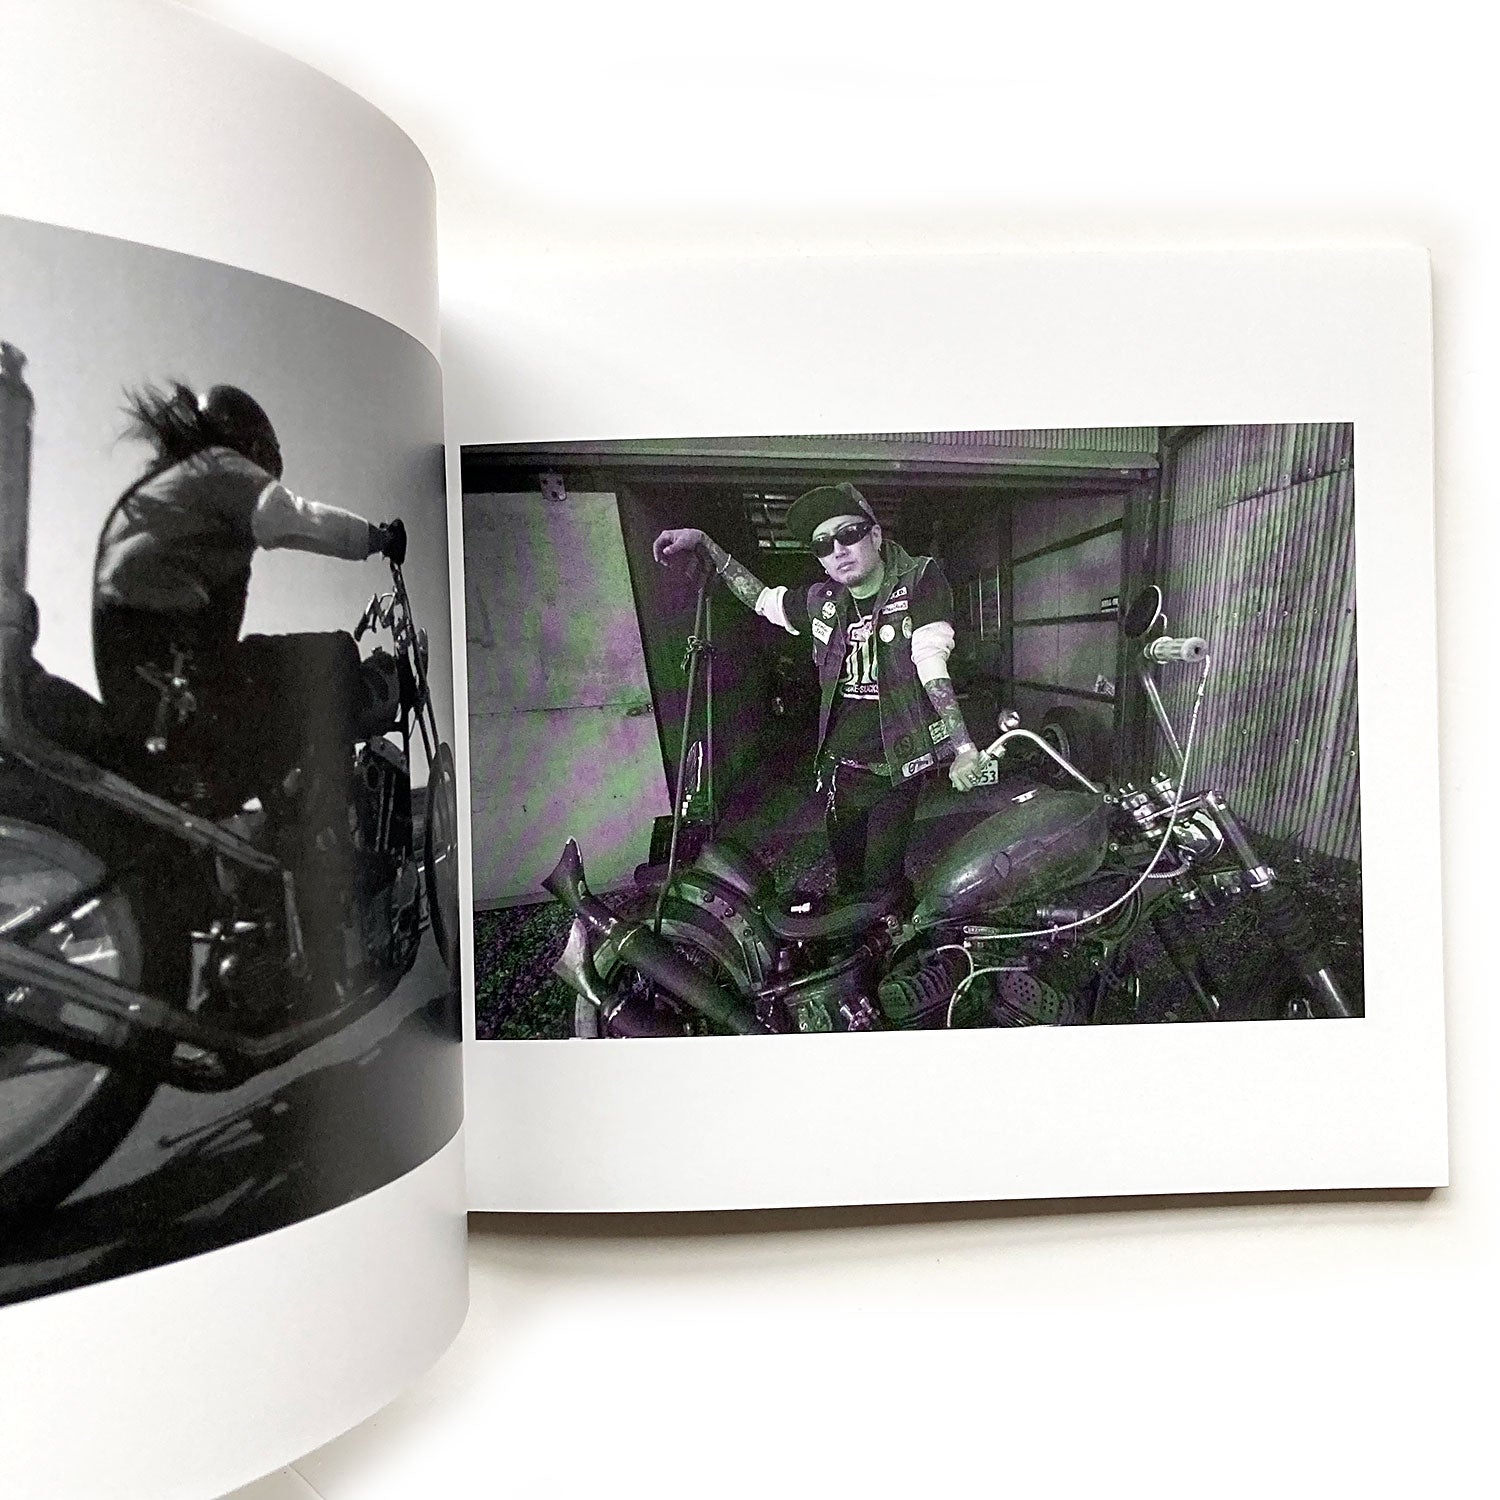 Photography compilation book-zine by Adam Wright